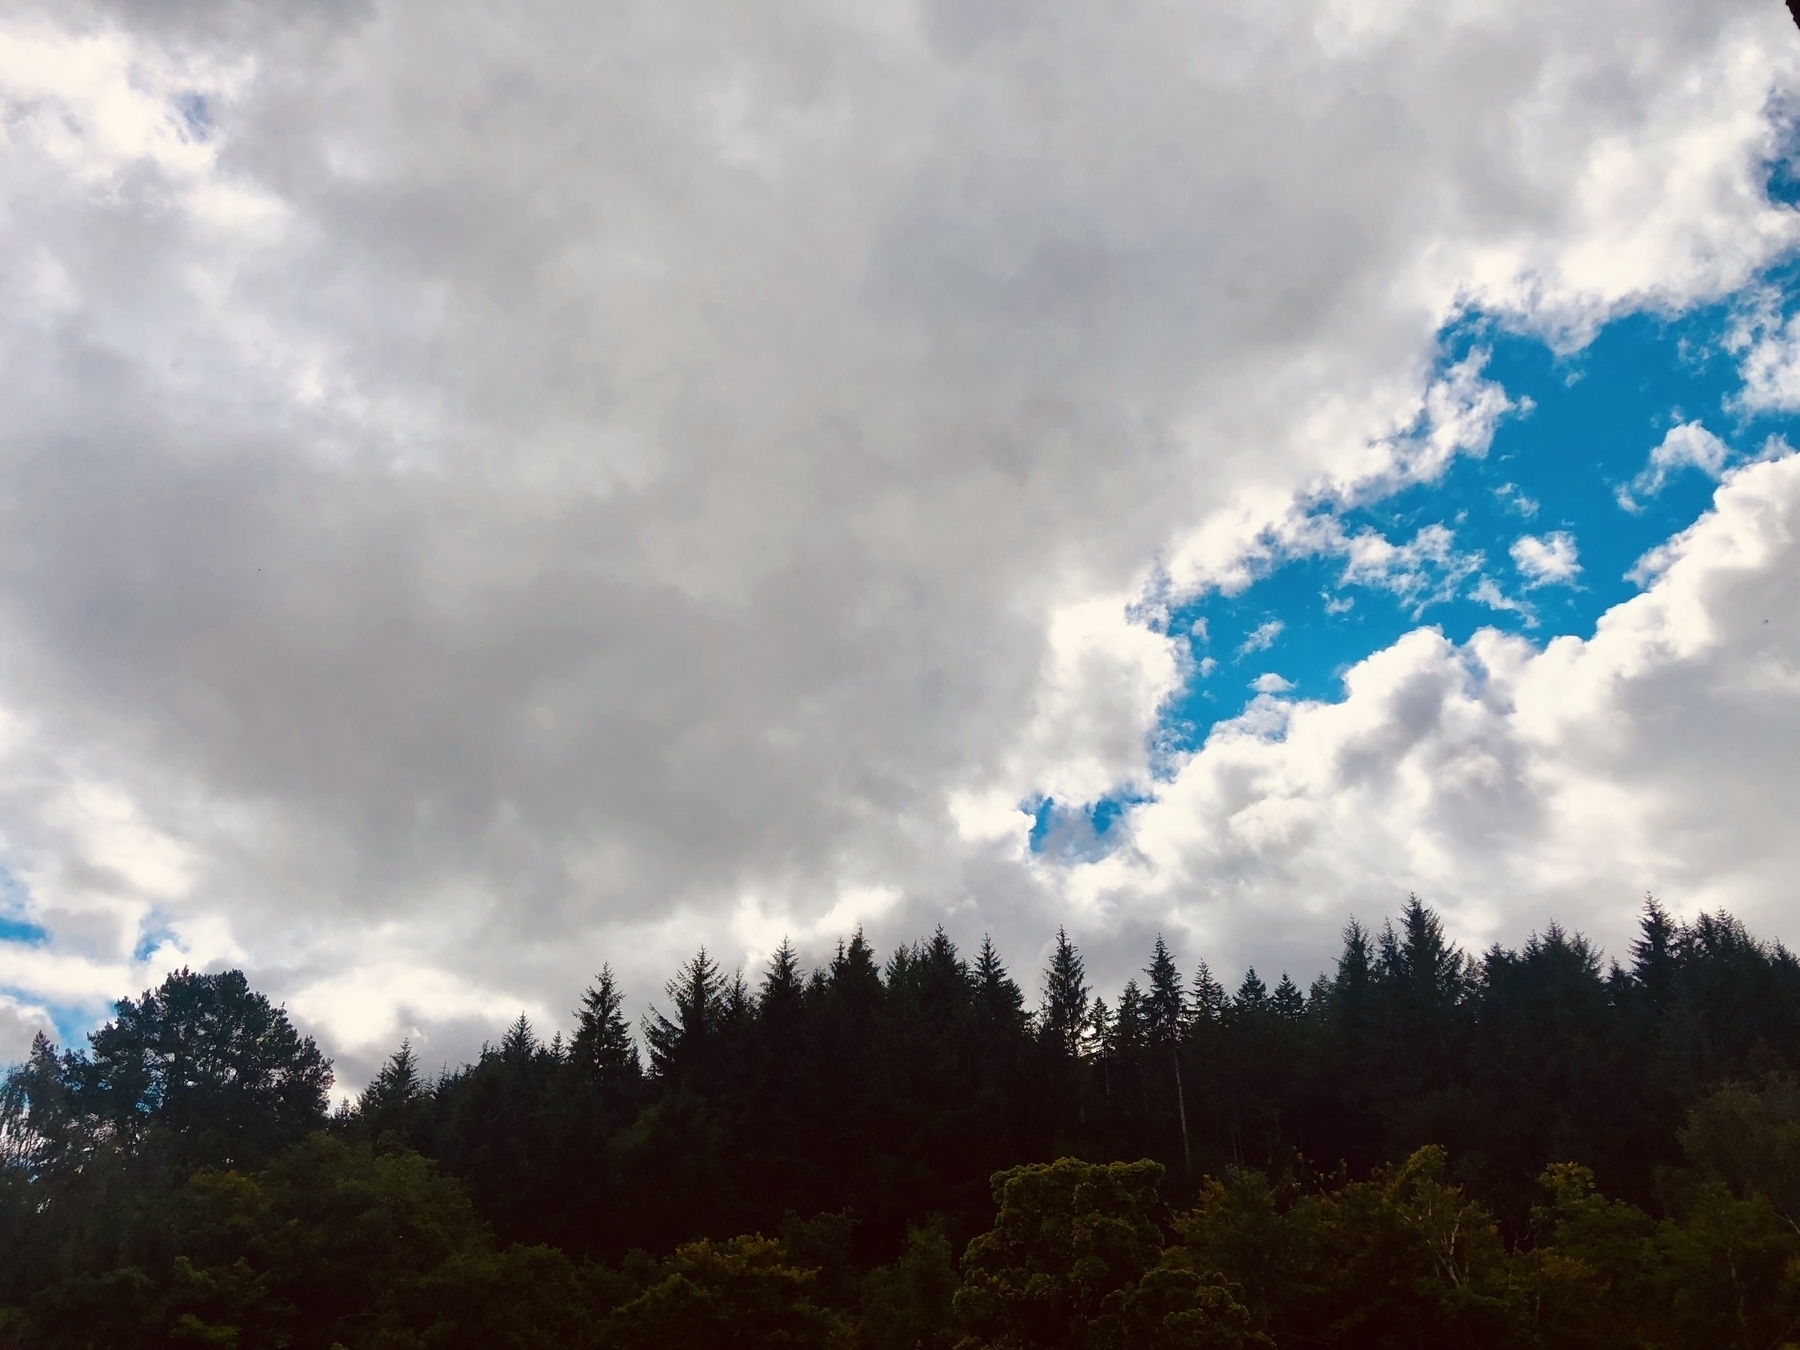 Clouds and pine trees